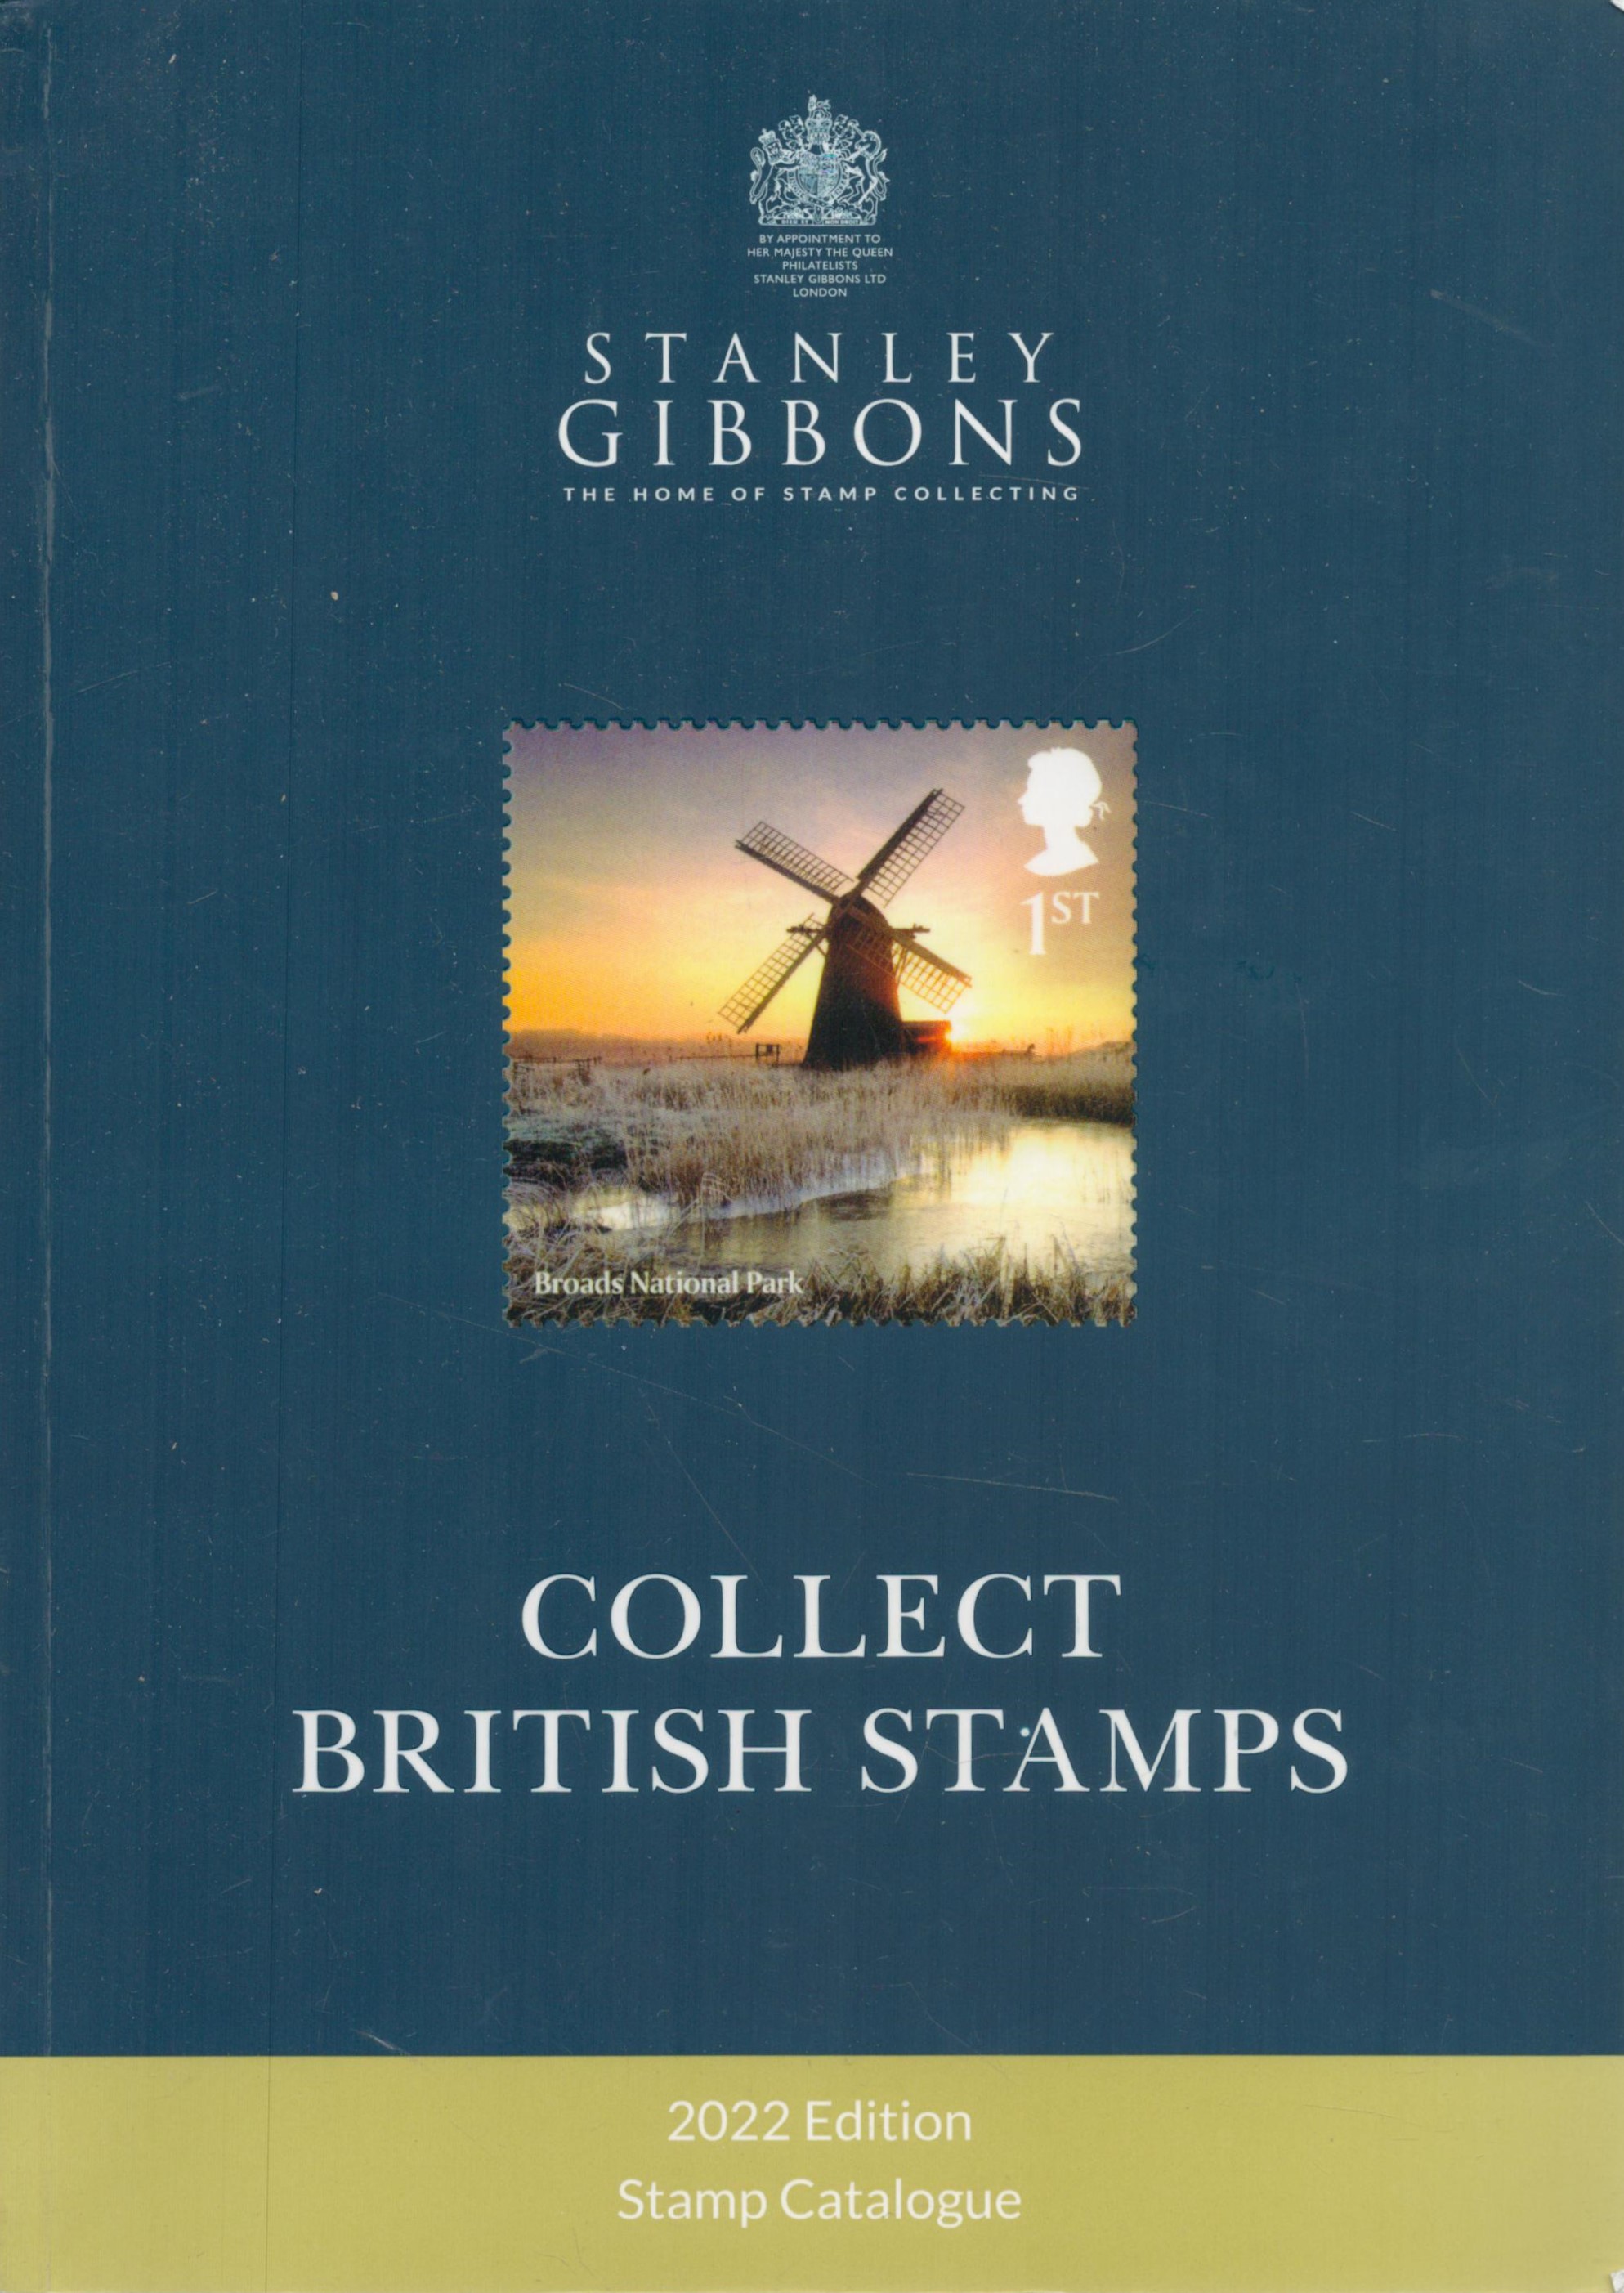 Stanley Gibbons Stamp Catalogue - Great Britain 23rd Edition Softback Catalogue 2022 with 326 pages.